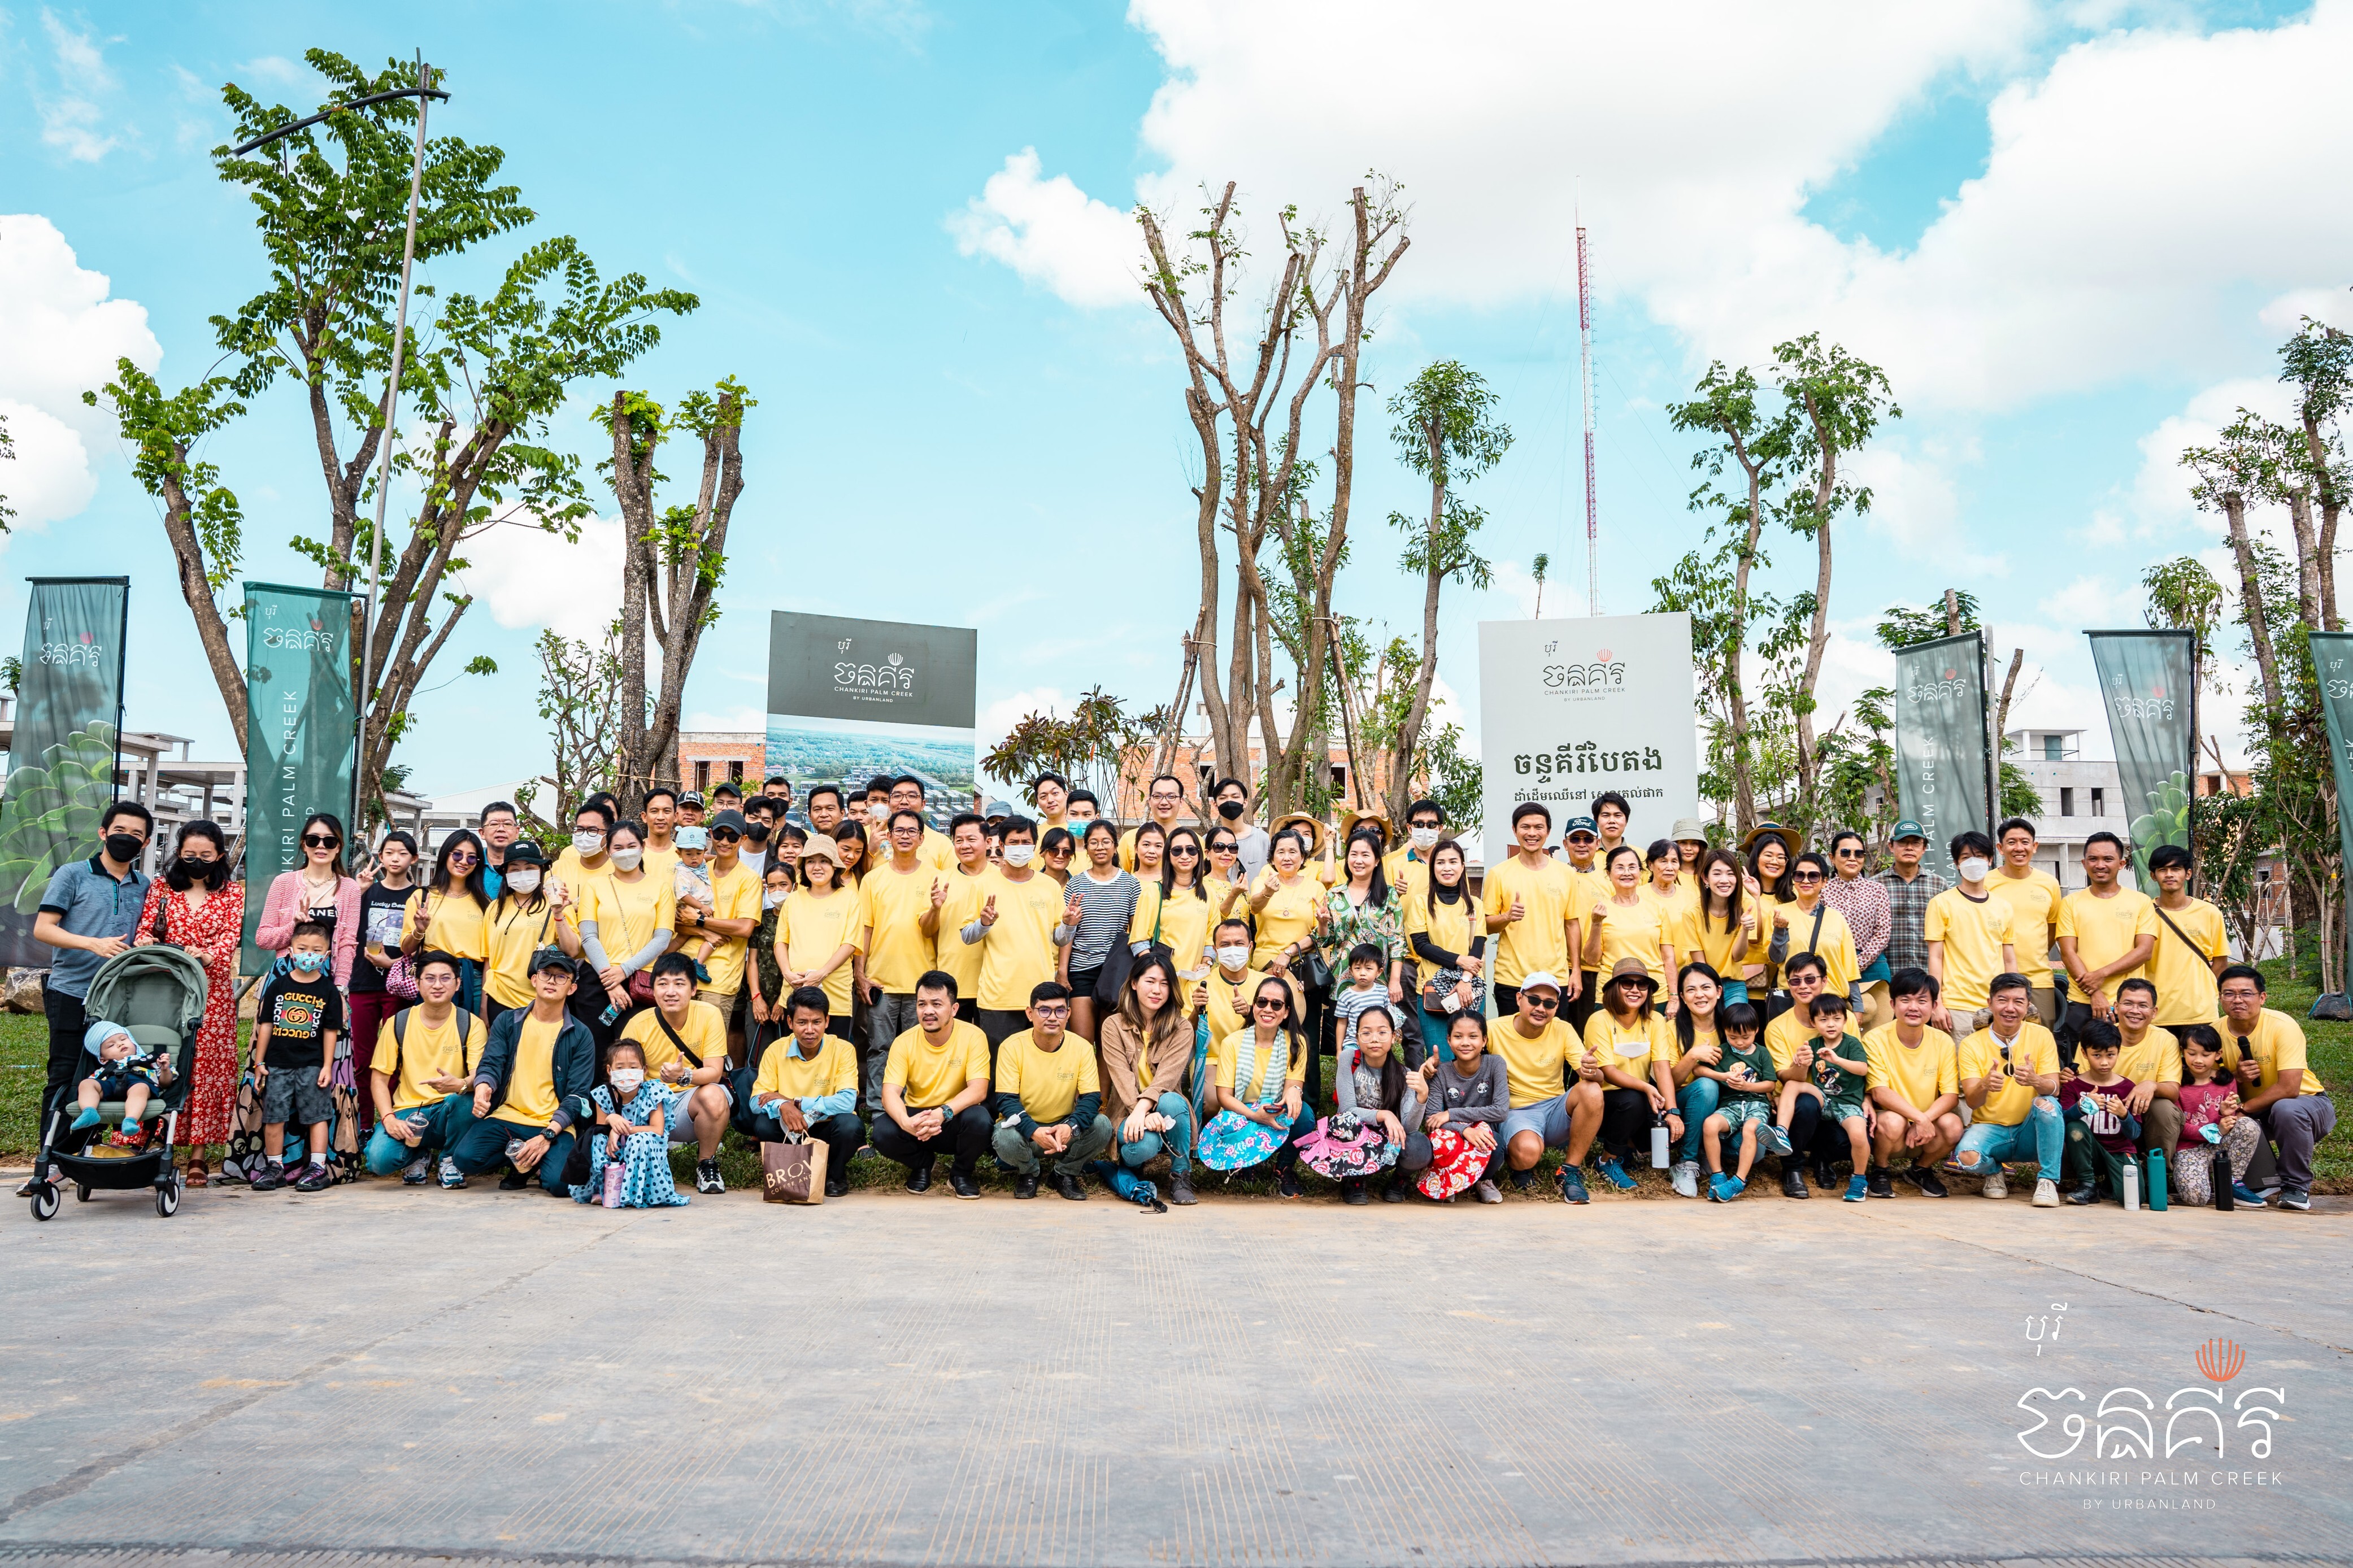 Chankiri community showed up to plant trees at Central Park